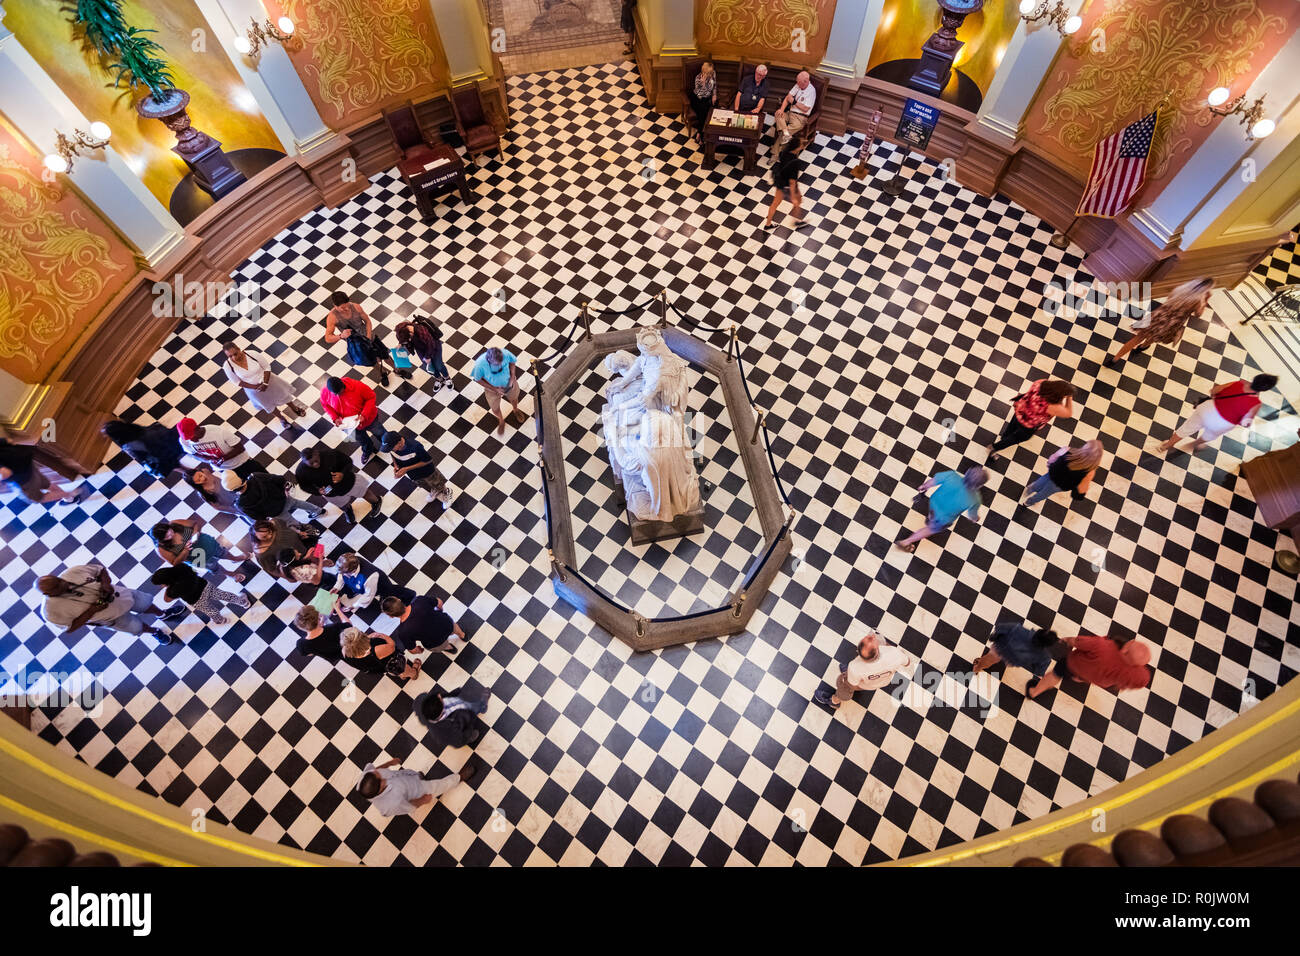 September 22, 2018 Sacramento / CA / USA - People visiting the California State Capitol; The building serves as both a museum and the state’s working  Stock Photo